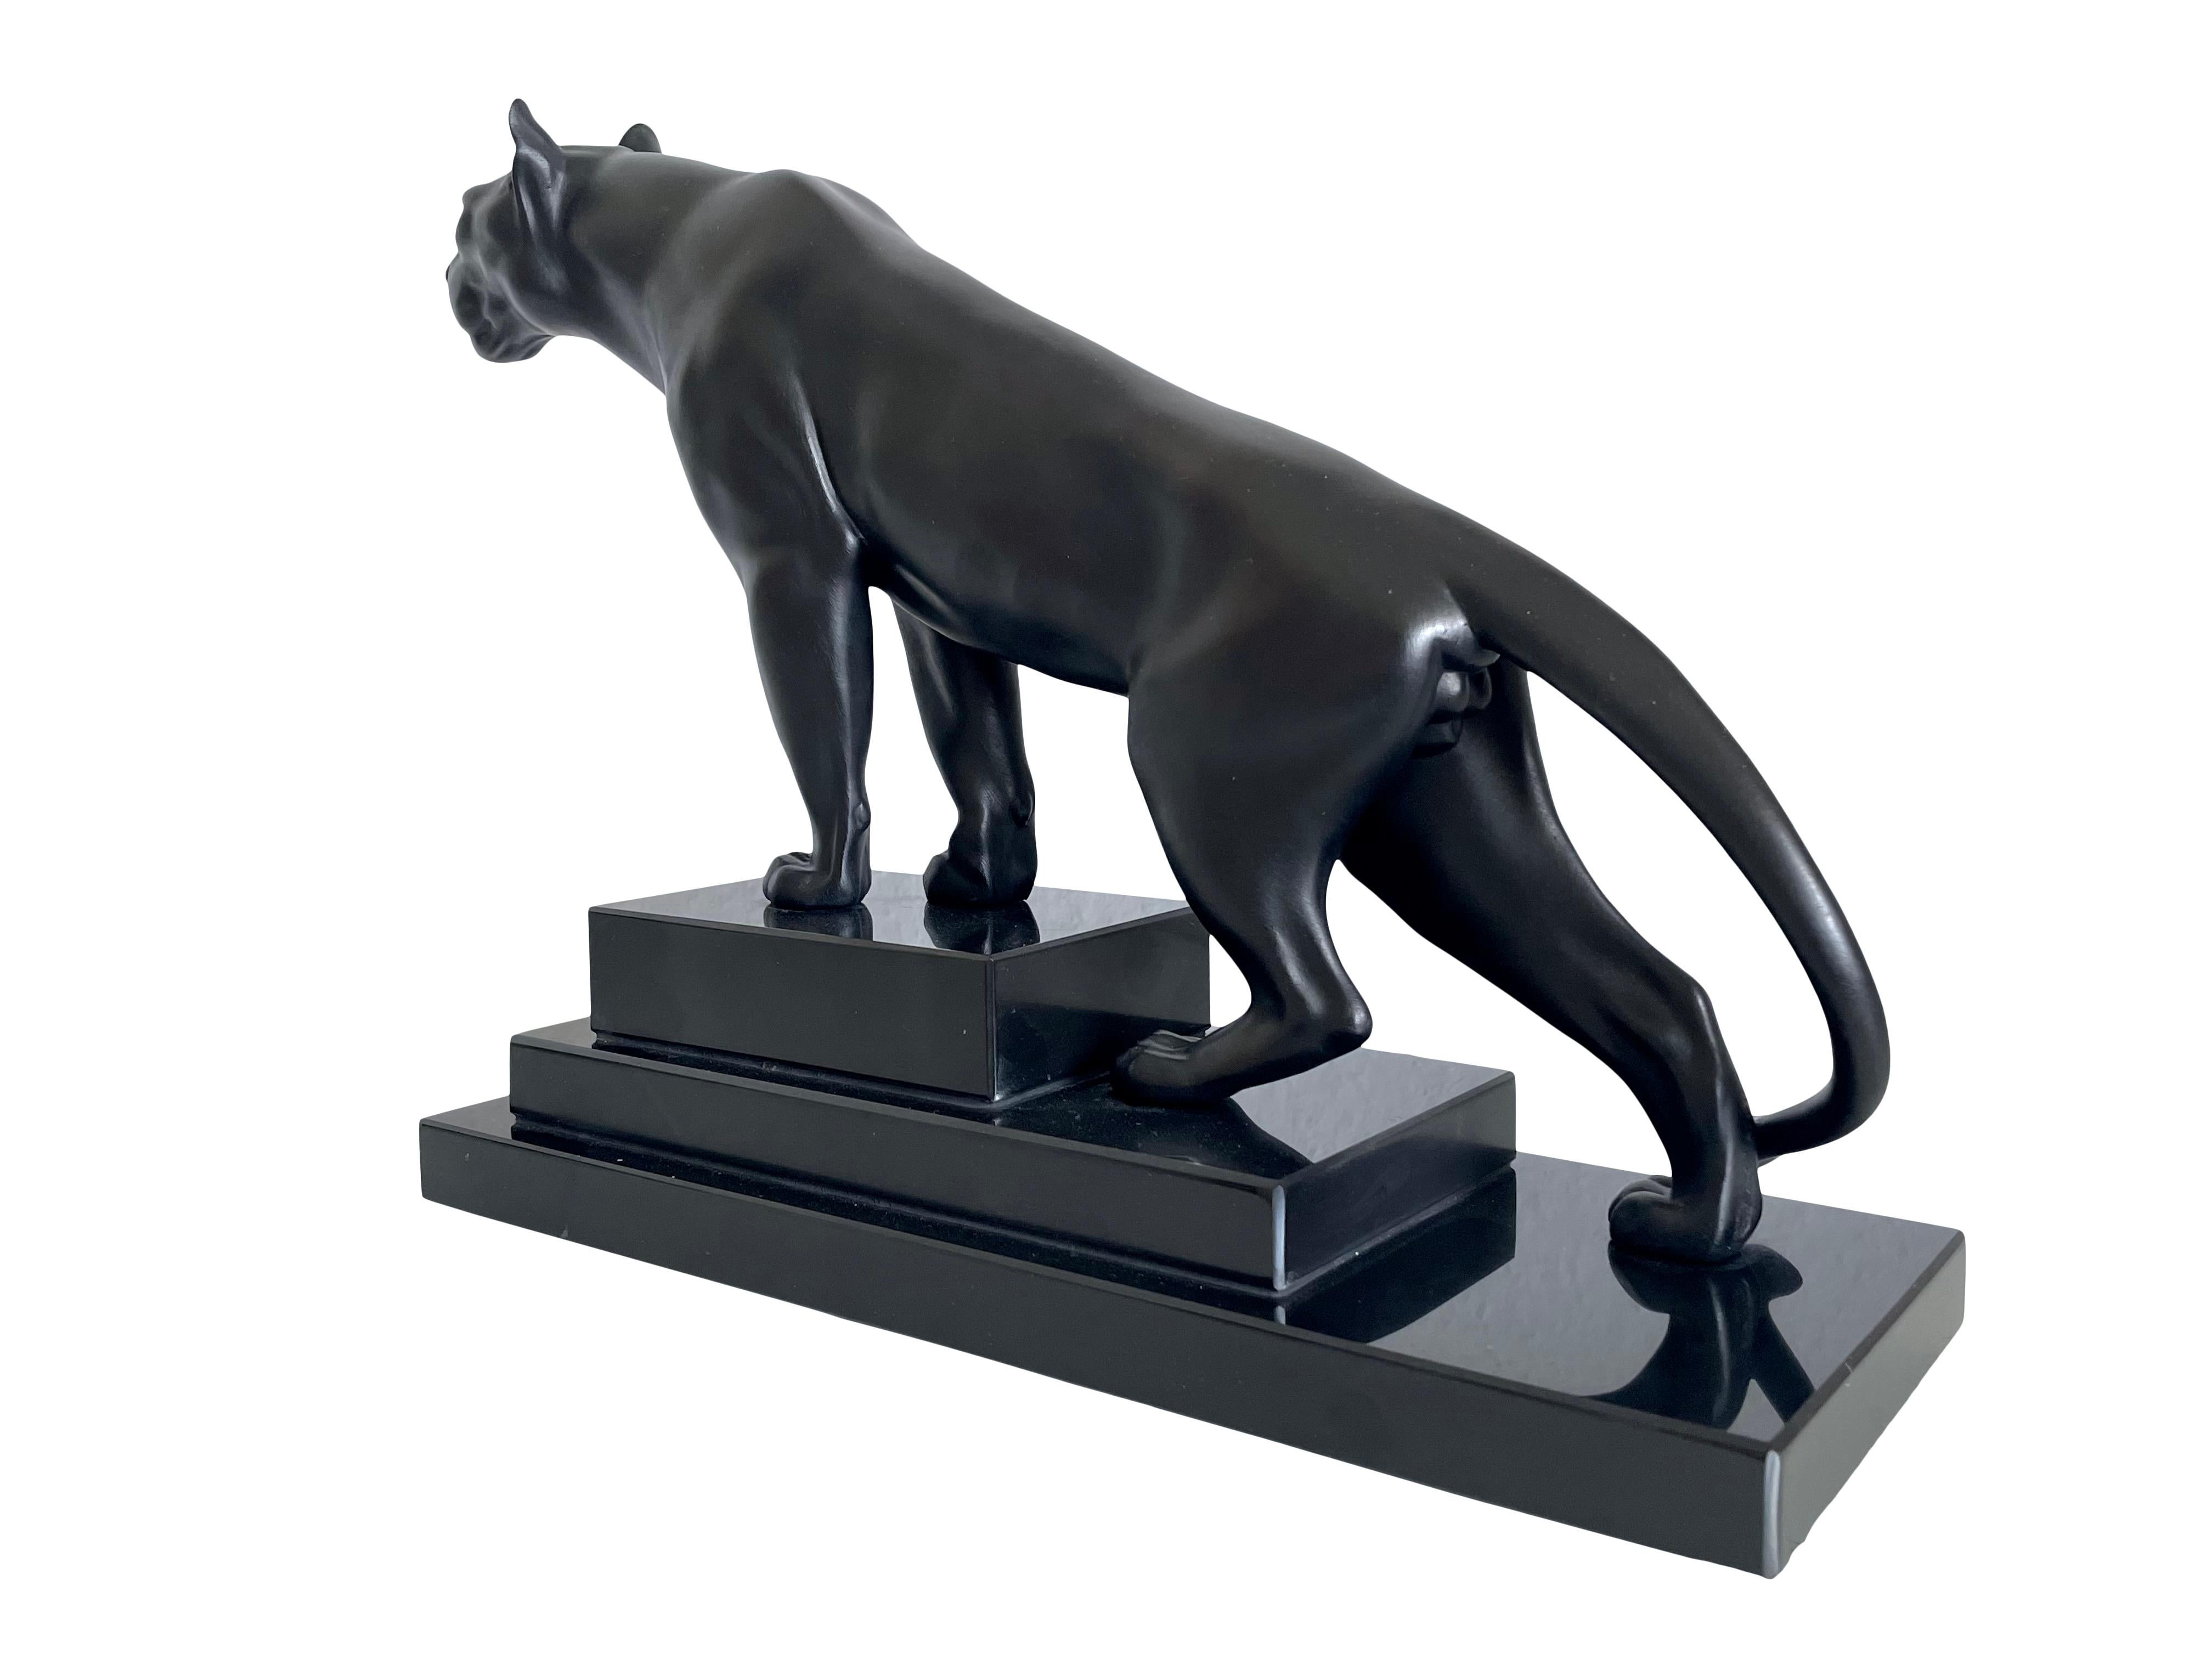 Spelter Black Panther Sculpture by Max Le Verrier on a Stepped Marble Base